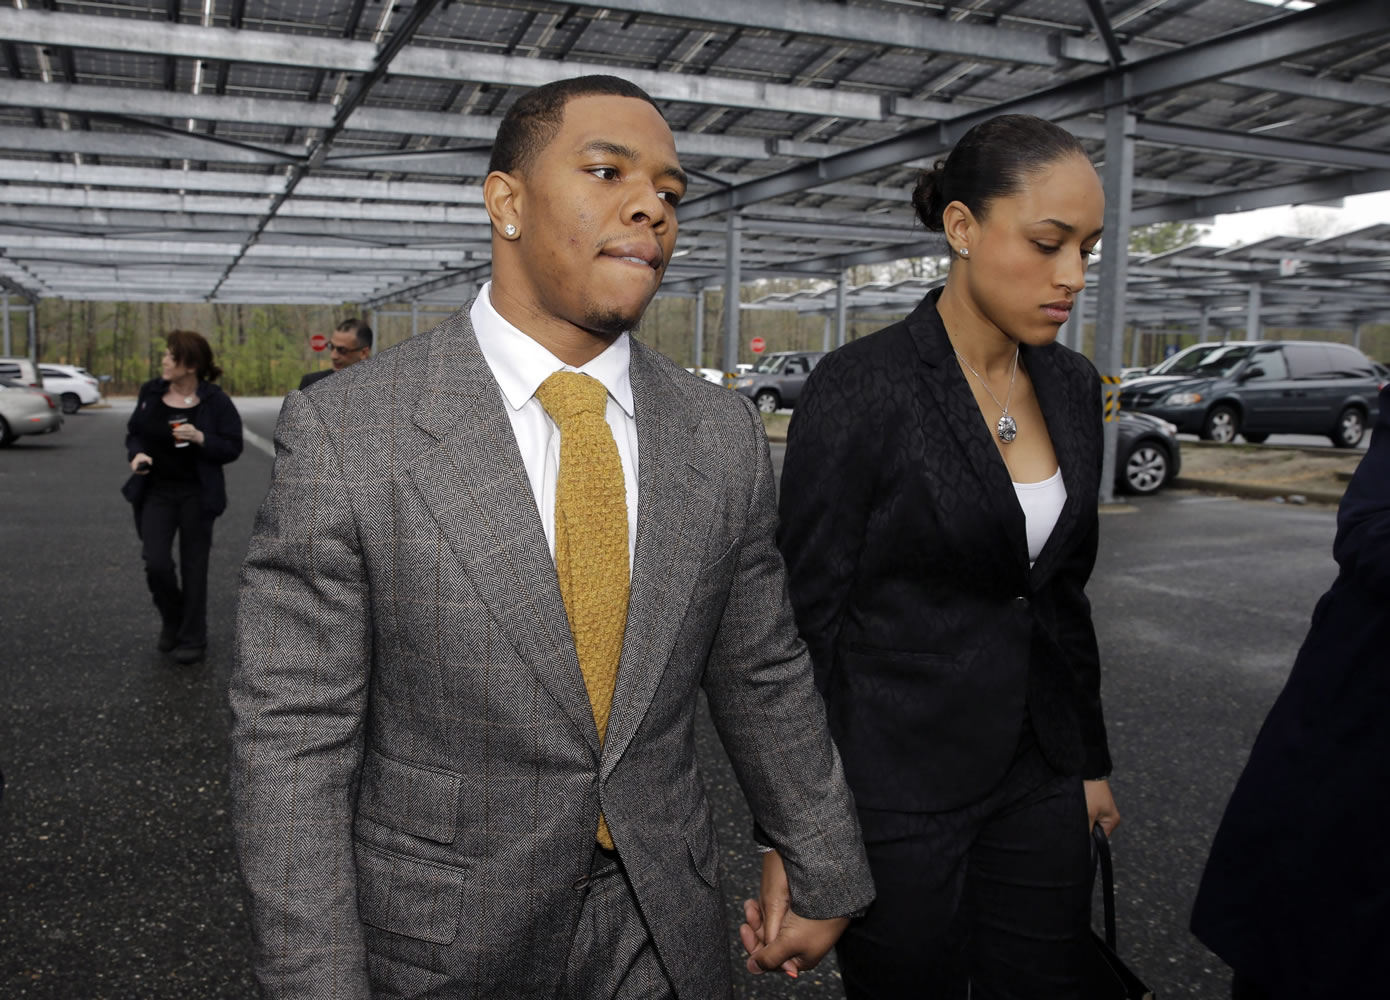 Baltimore Ravens football player Ray Rice holds hands with his wife, Janay Palmer, as they arrive May 1 at Atlantic County Criminal Courthouse in Mays Landing, N.J.